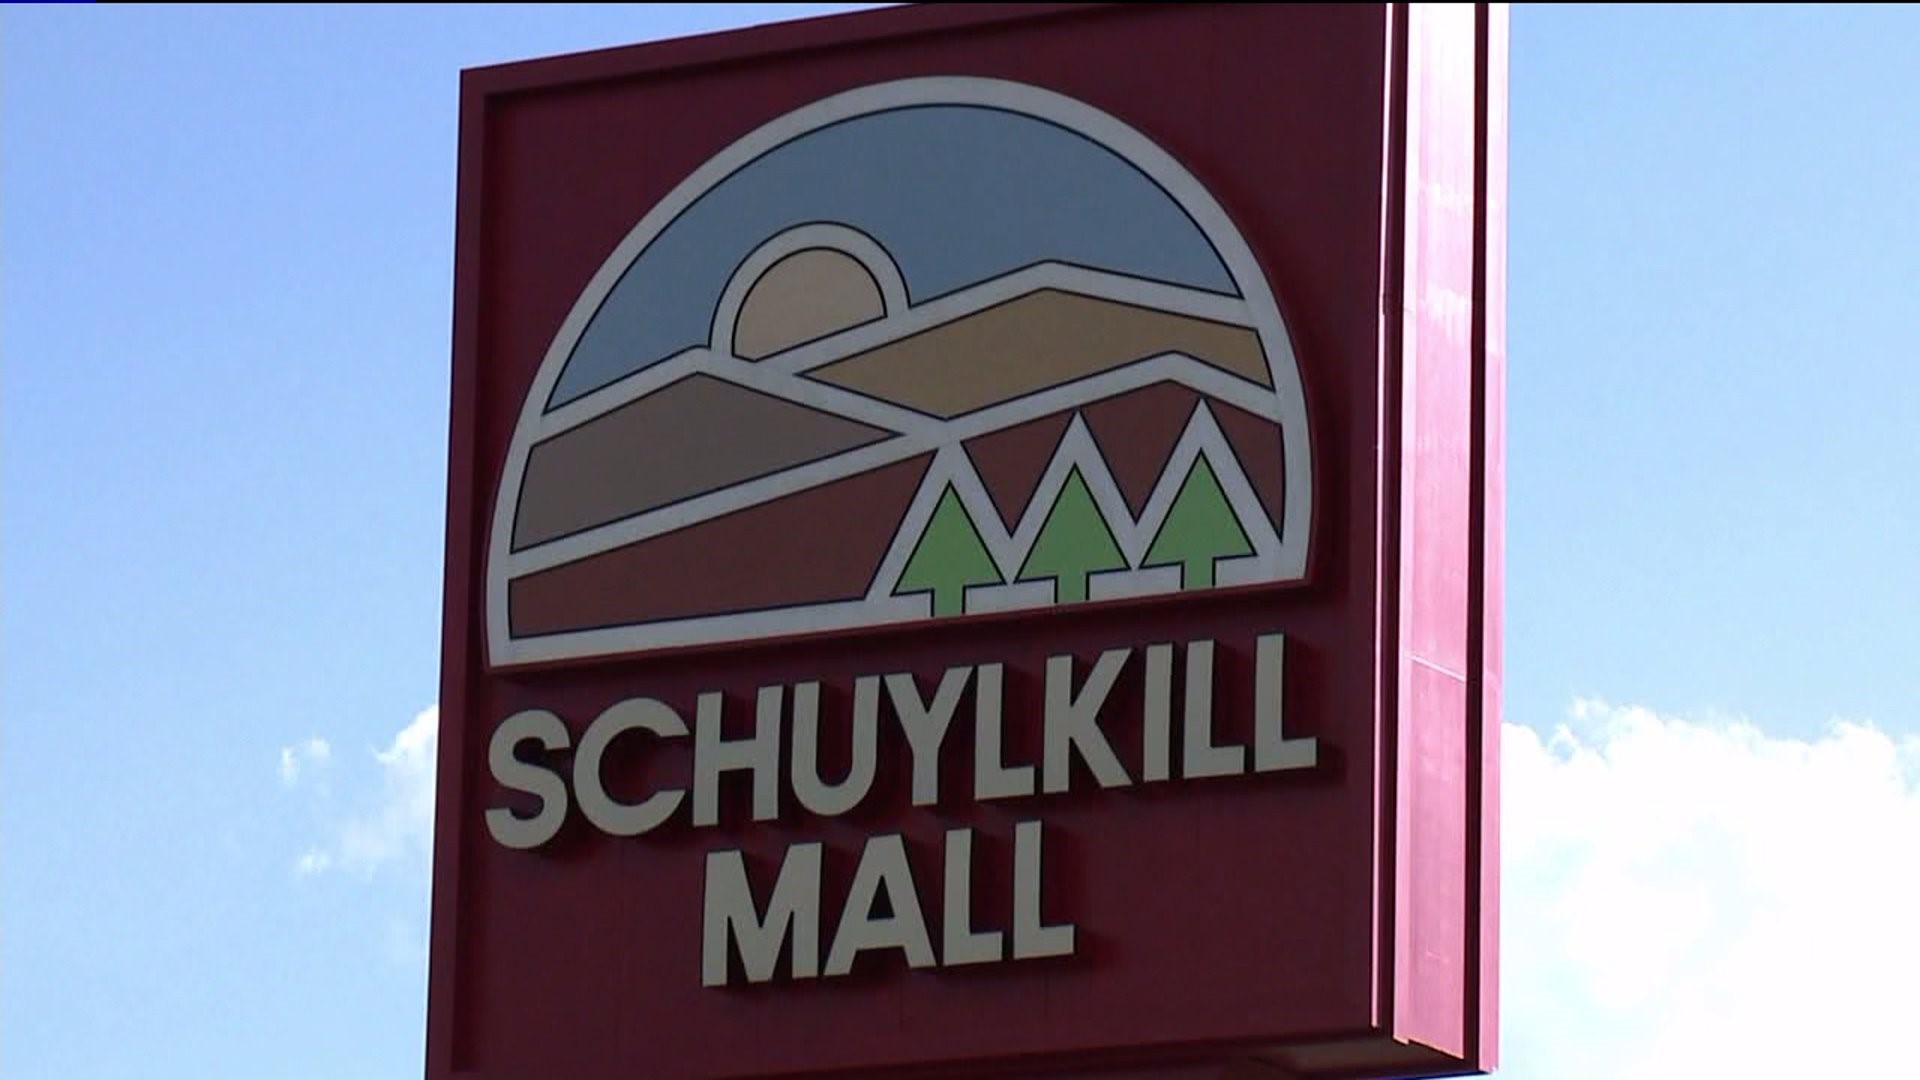 Schuylkill Mall Owner Files for Chapter 7 Bankruptcy